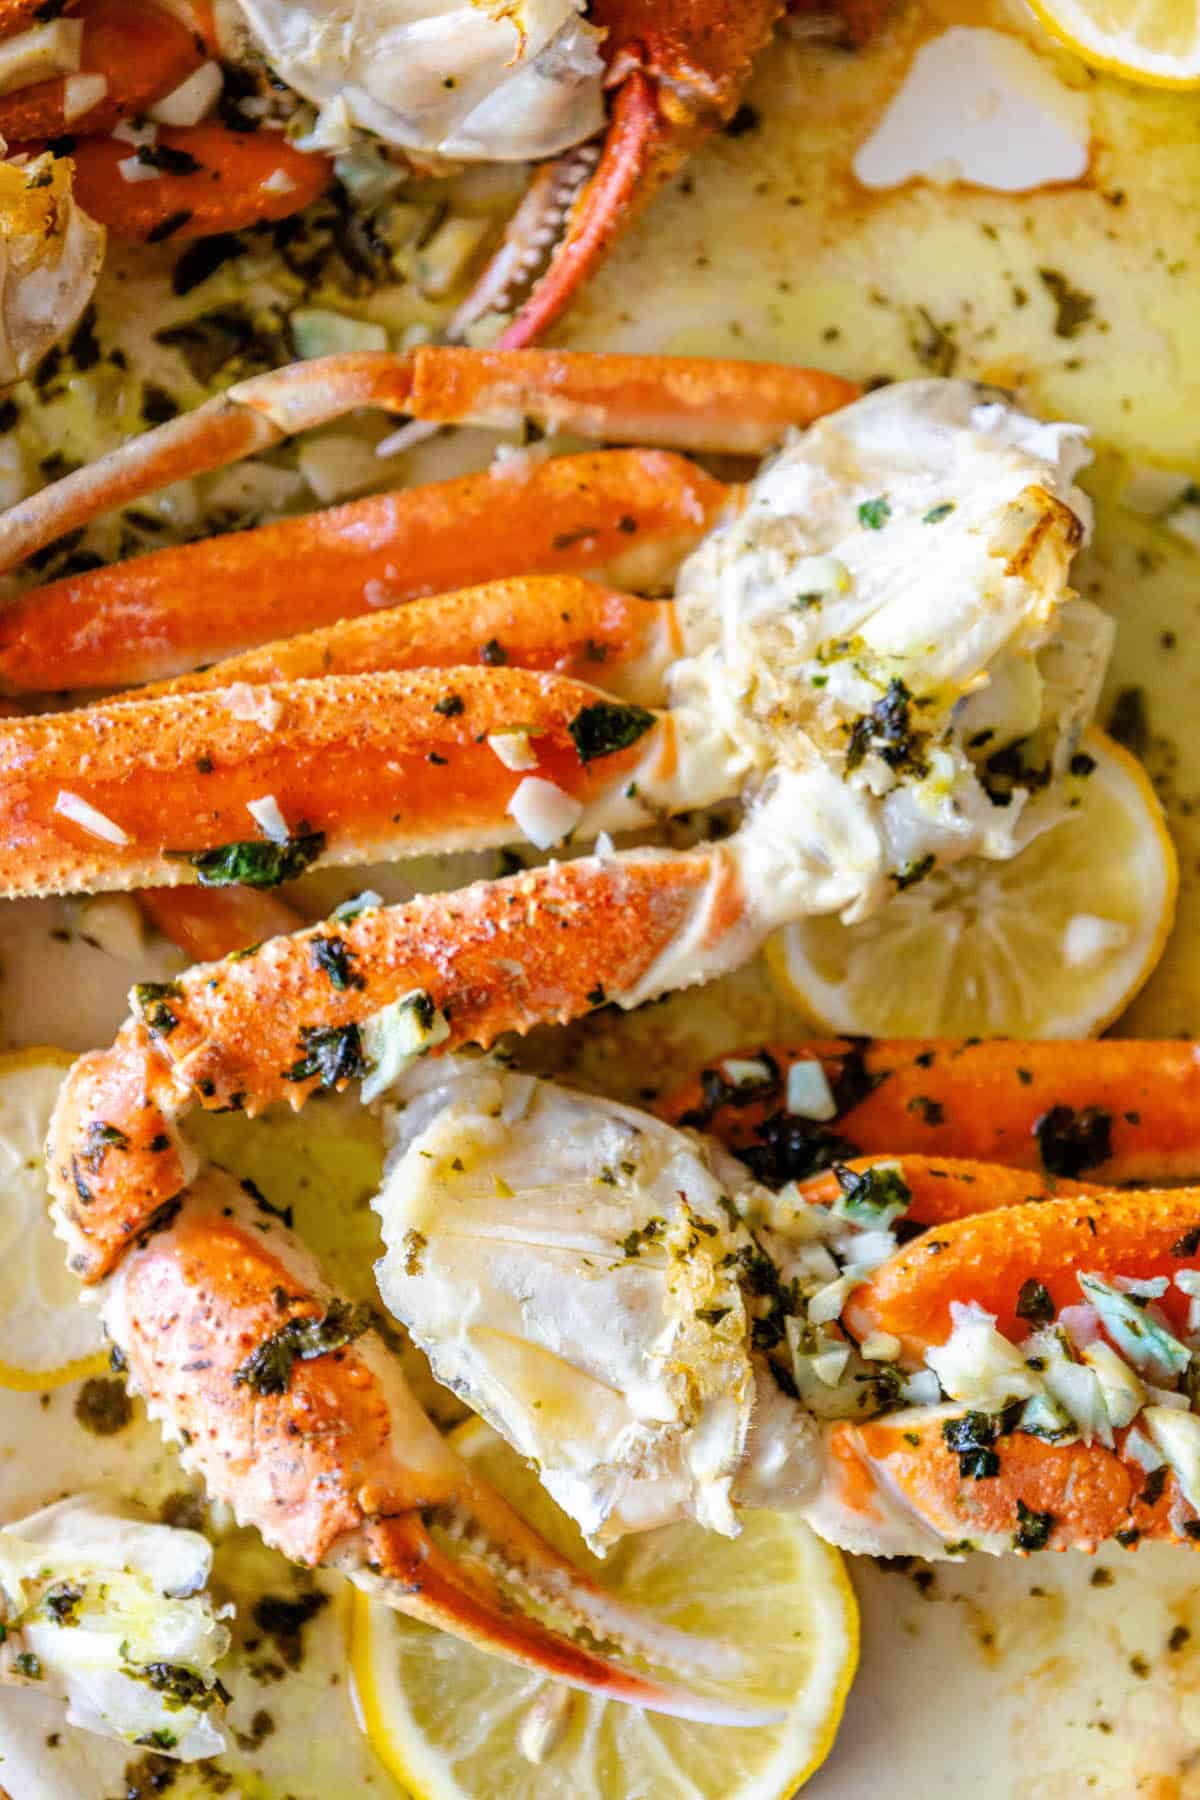 Baked Snow Crab Legs with lemon and herbs.